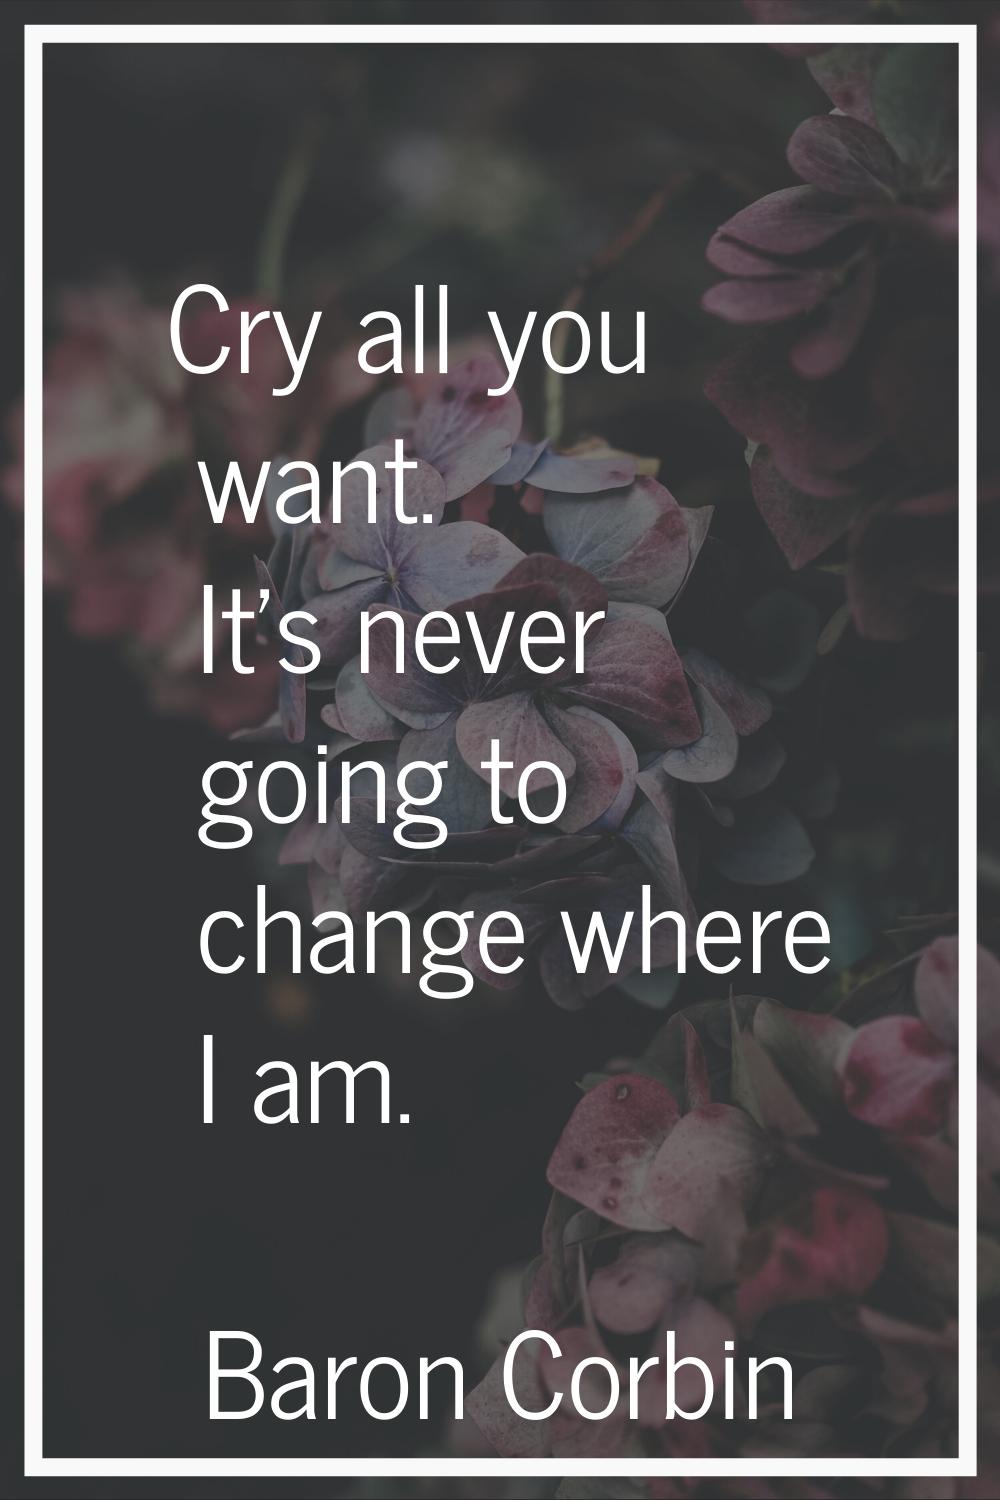 Cry all you want. It's never going to change where I am.